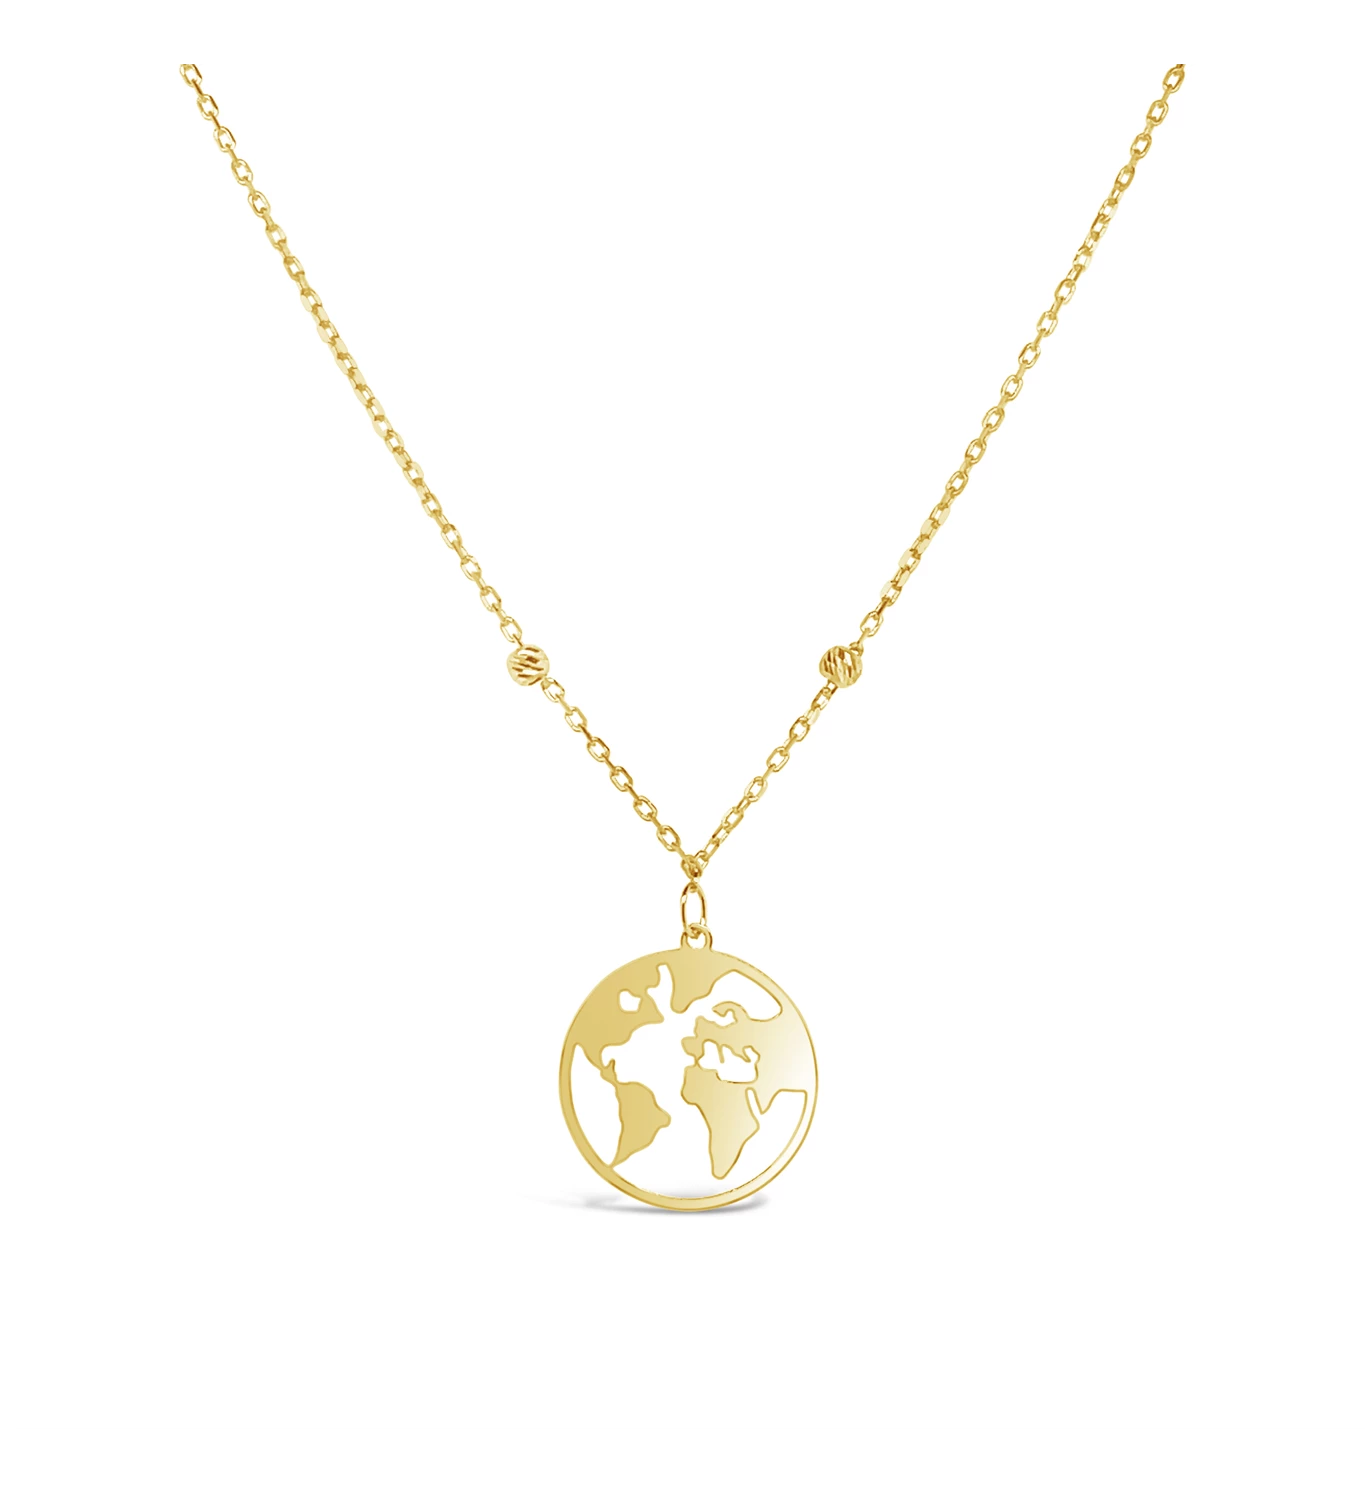 World gold necklace